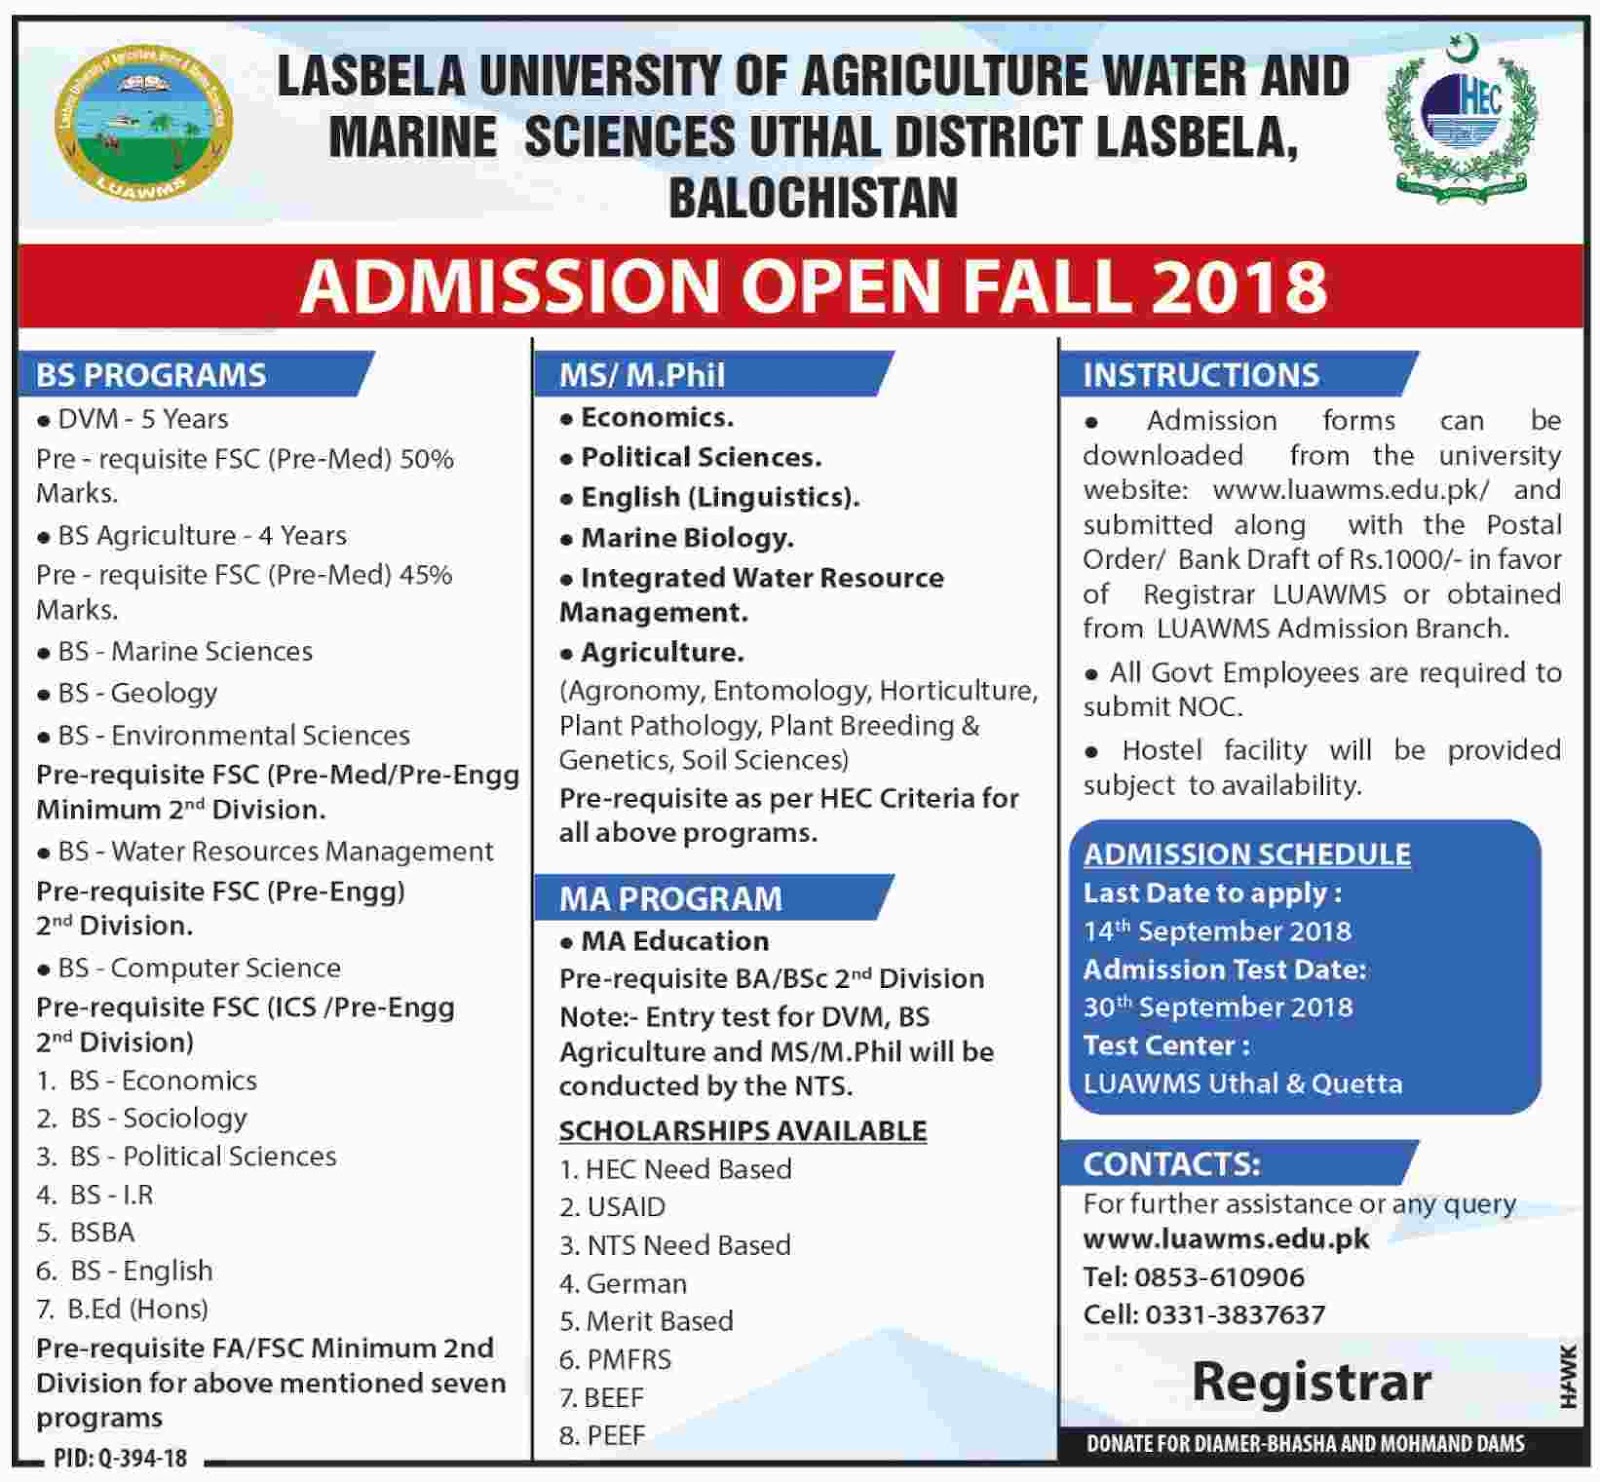 Admissions Open For Fall 2018 At LUAWMS Lasbela, Khuzdar and Dera Murad Jamali Campus